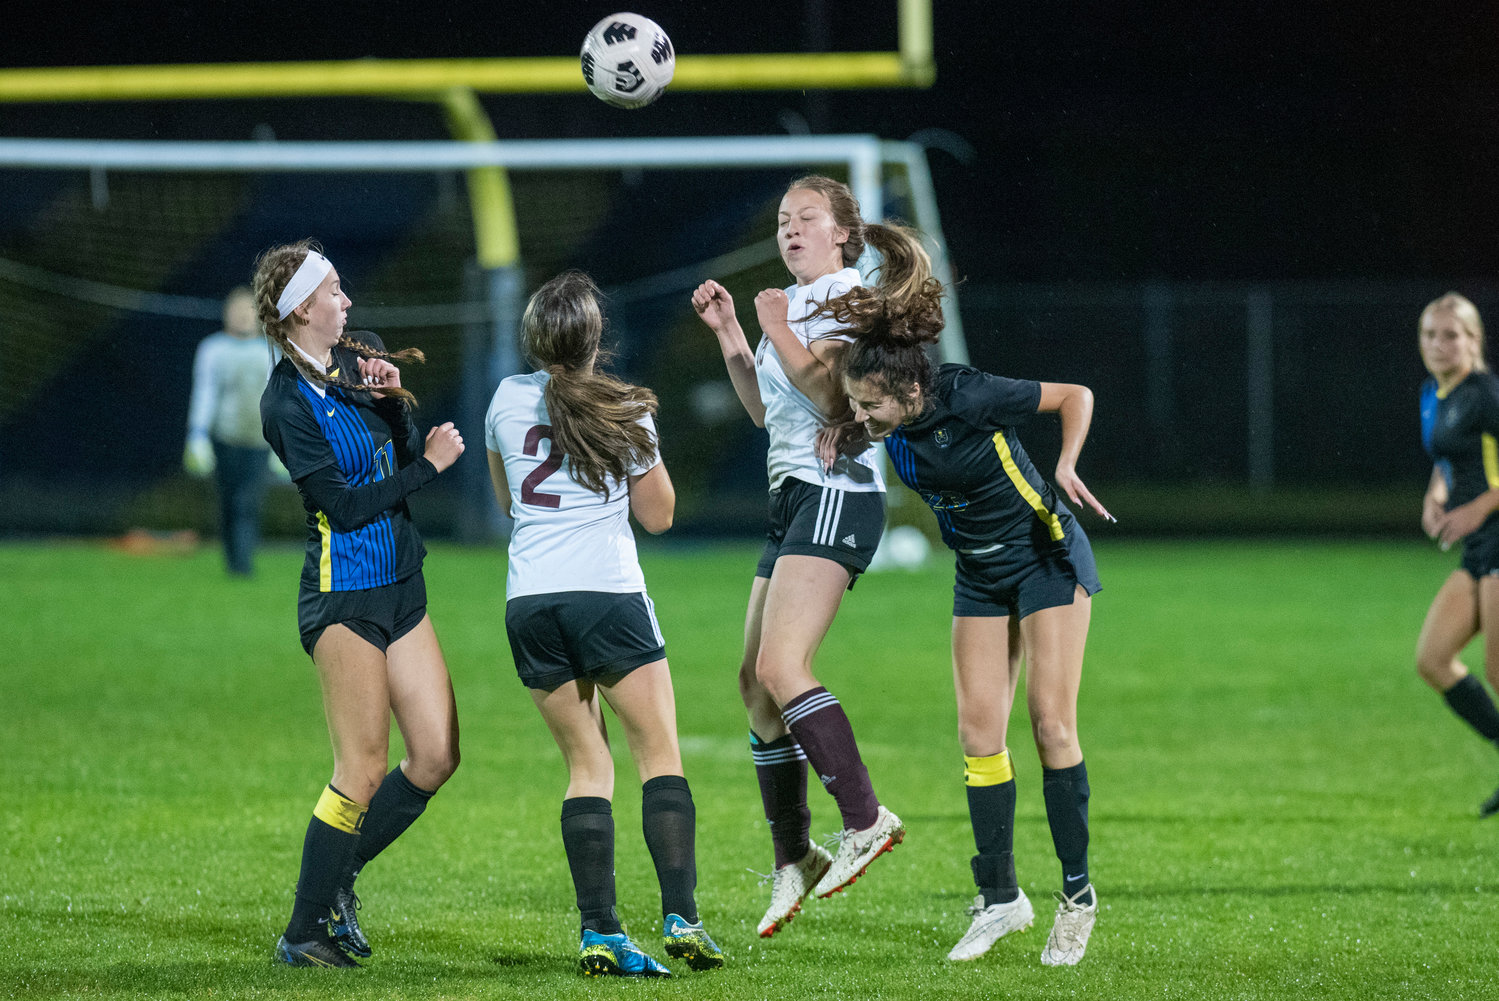 Adna's Presley Smith, right, heads the ball in traffic against Raymond-South Bend on Oct. 13, 2021.